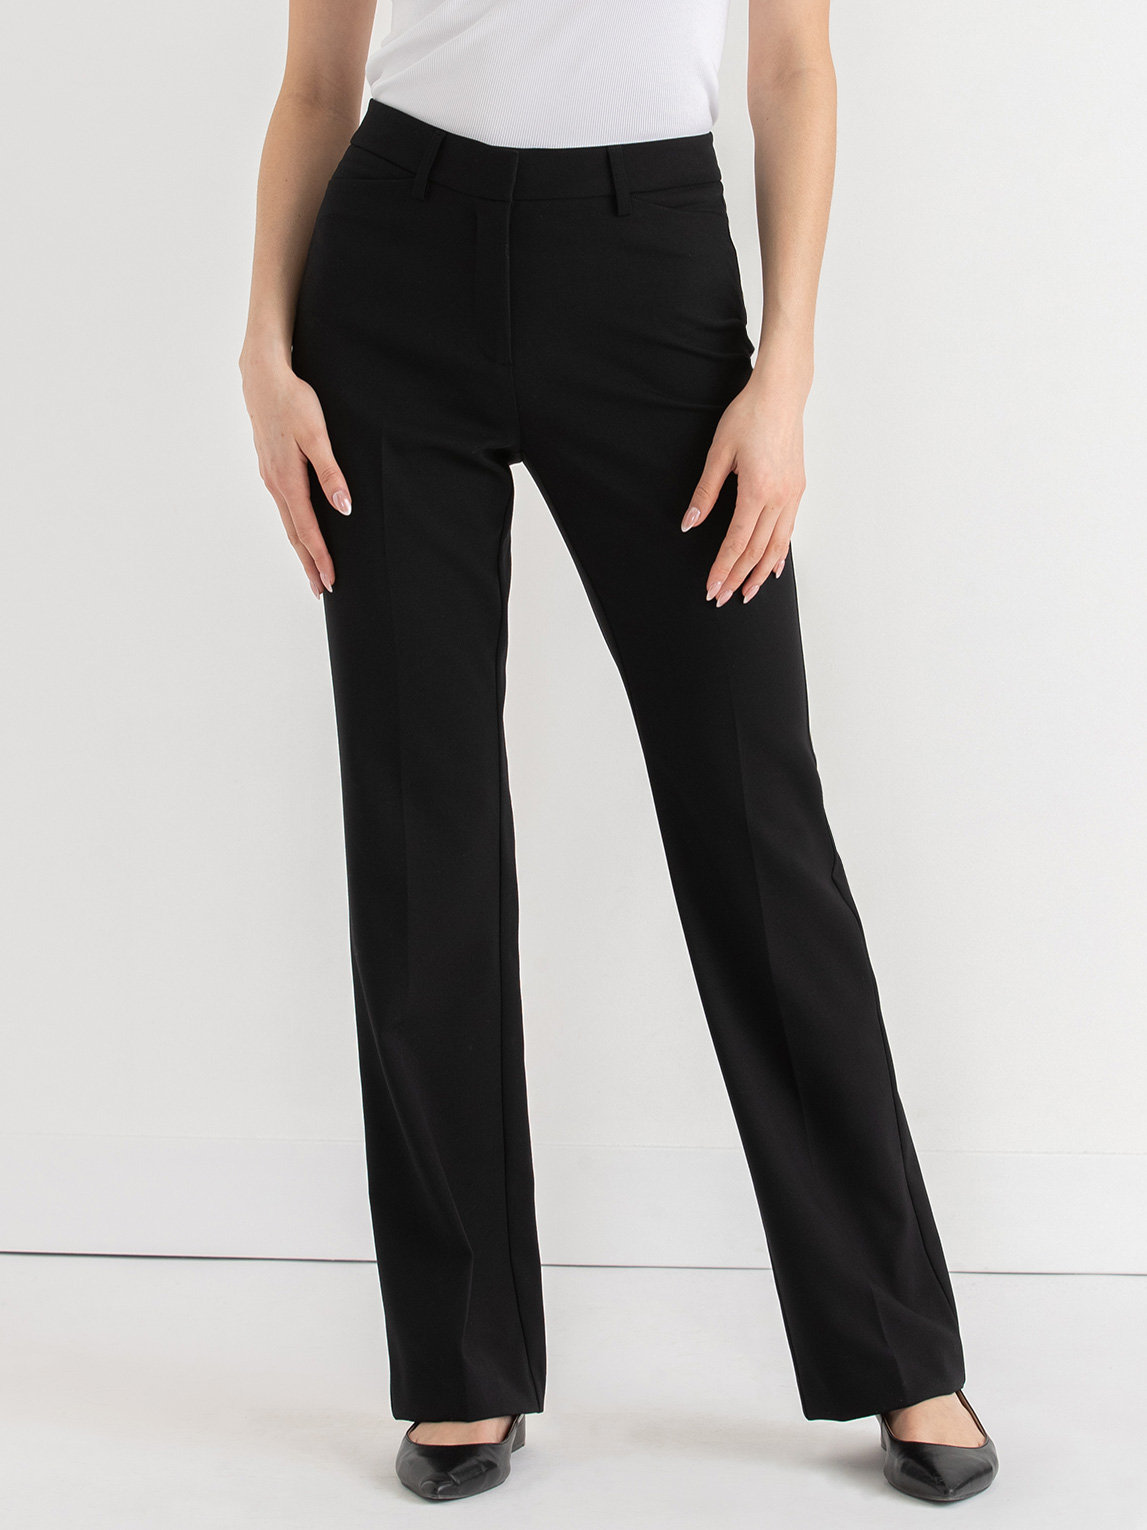 Bradley Bootcut Luxe Tailored Pant